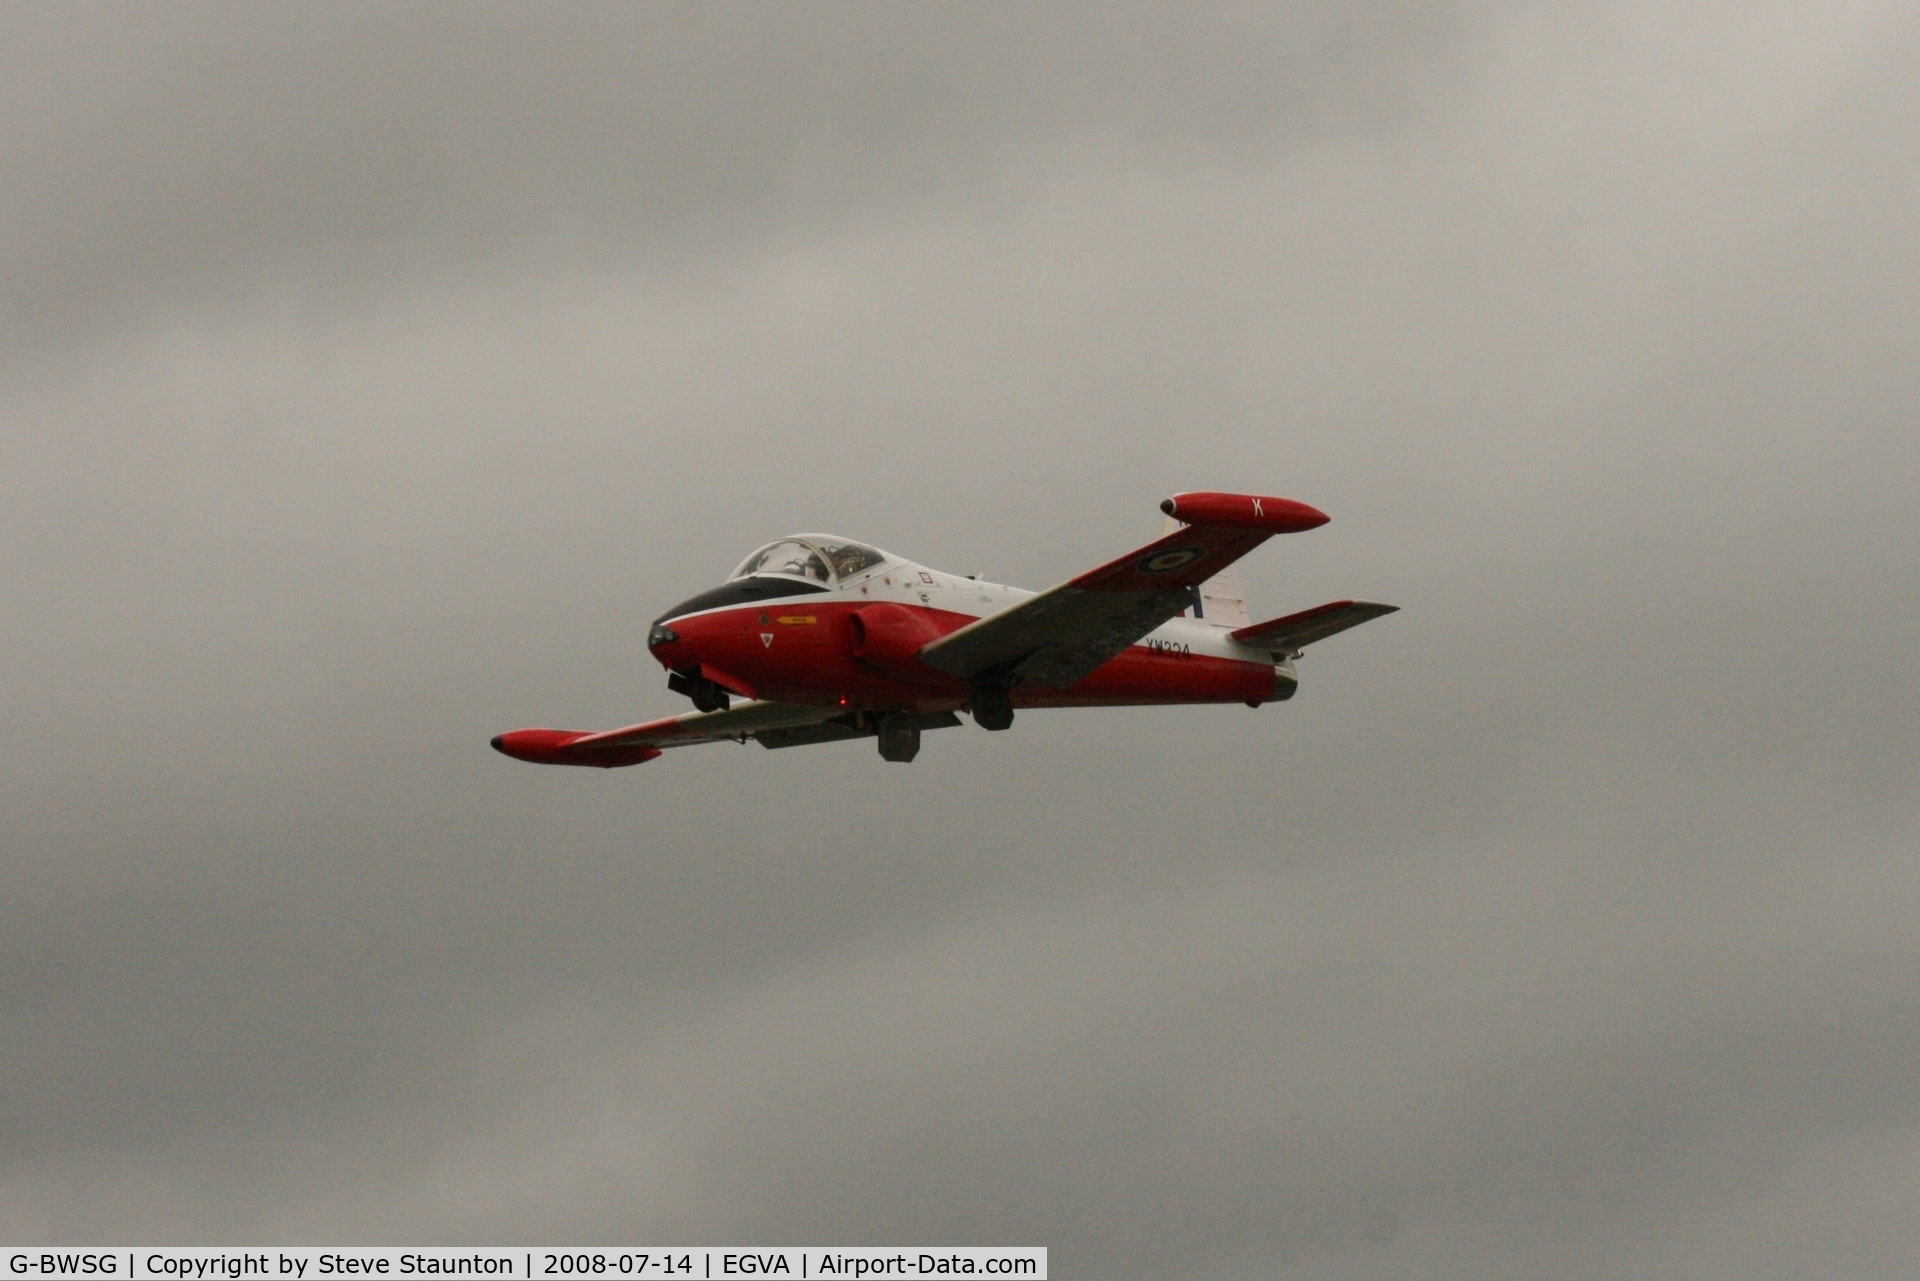 G-BWSG, 1970 BAC 84 Jet Provost T.5 C/N EEP/JP/988, Taken at the Royal International Air Tattoo 2008 during arrivals and departures (show days cancelled due to bad weather)